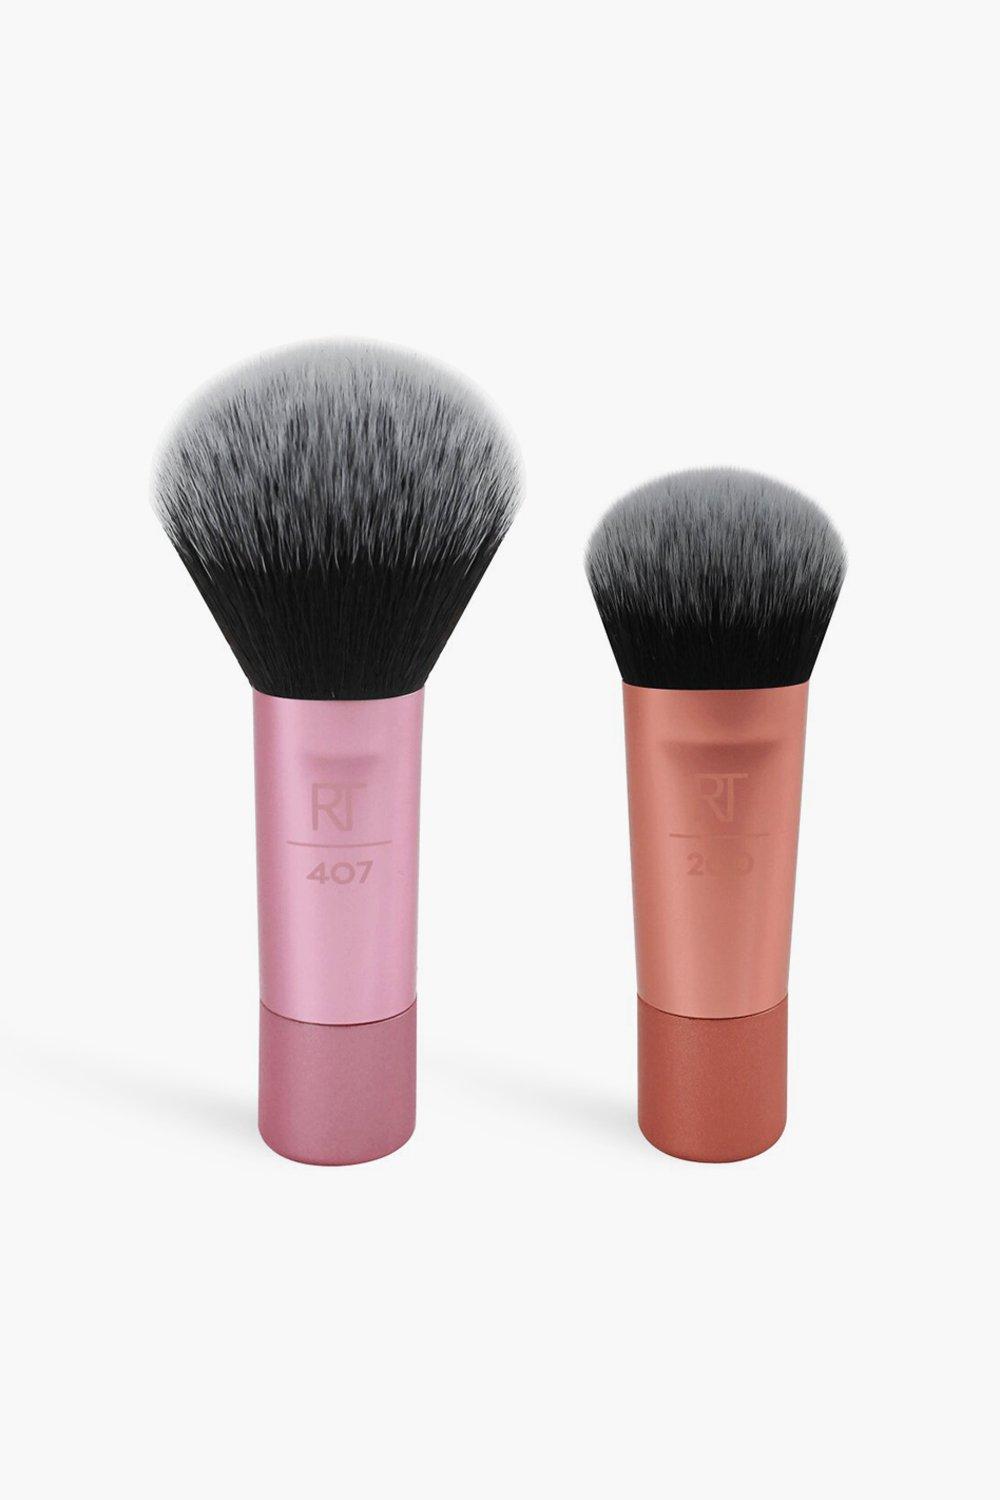 Real Techniques Mini Brush Duo, Pink